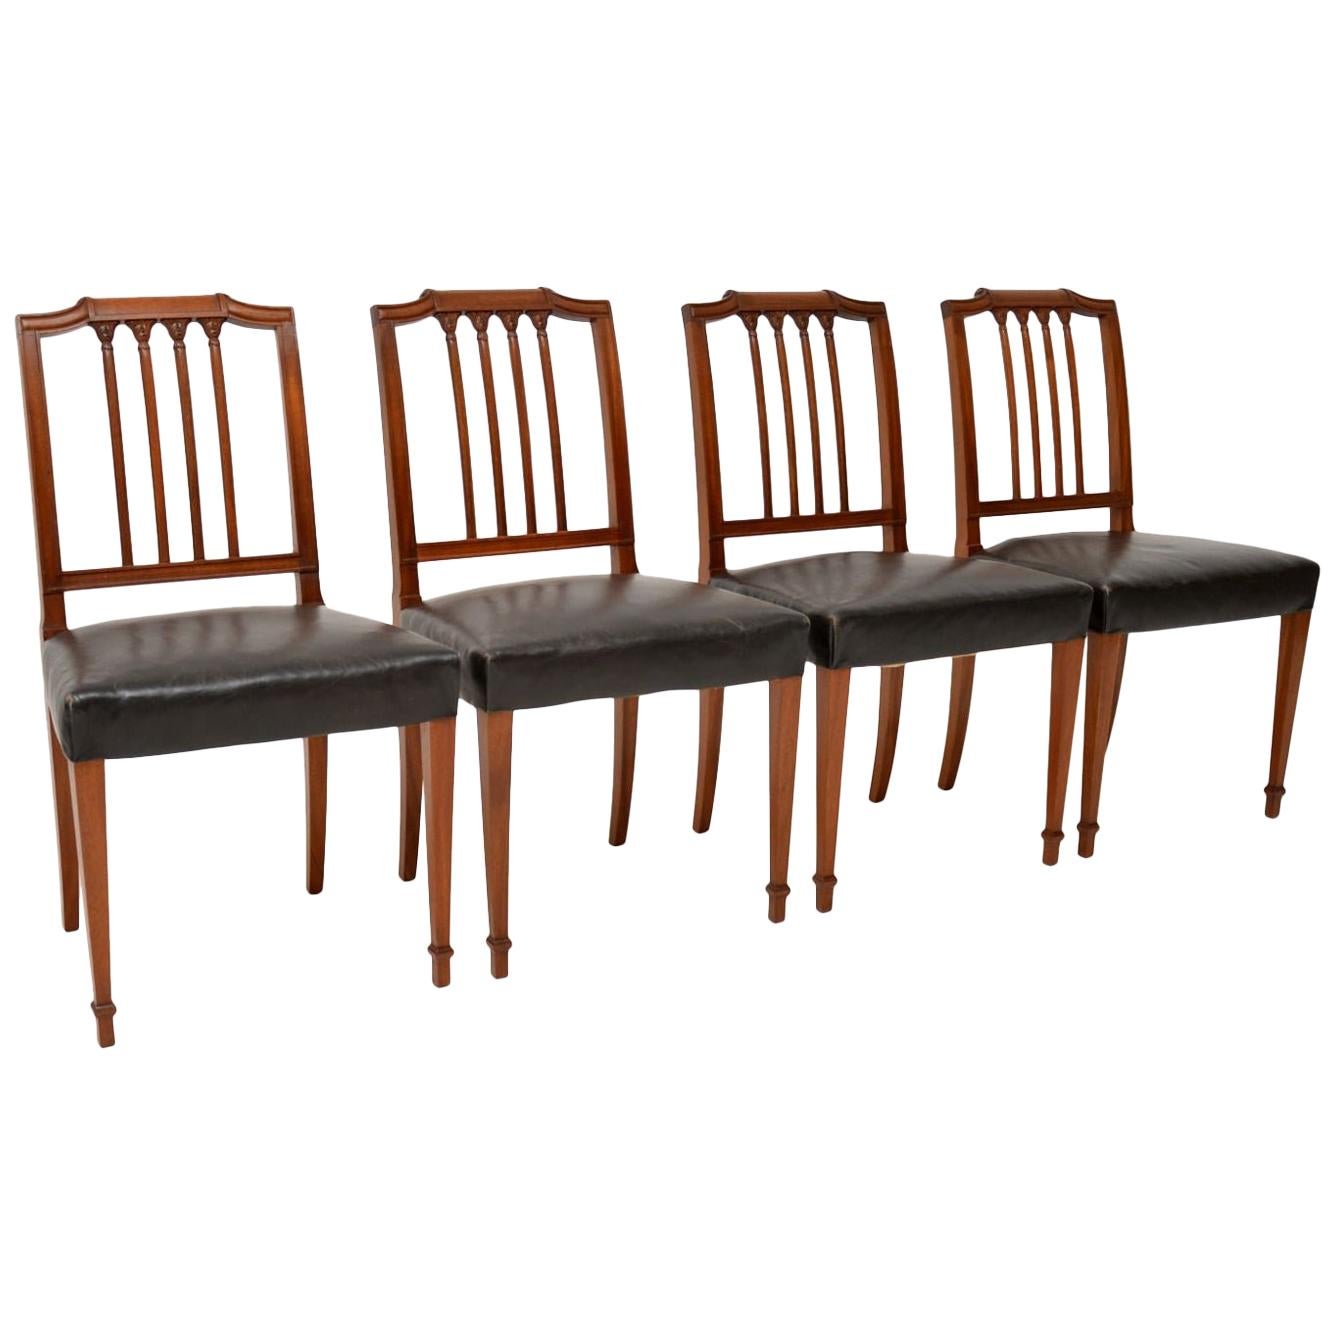 Set of Four Antique Mahogany and Leather Dining Chairs